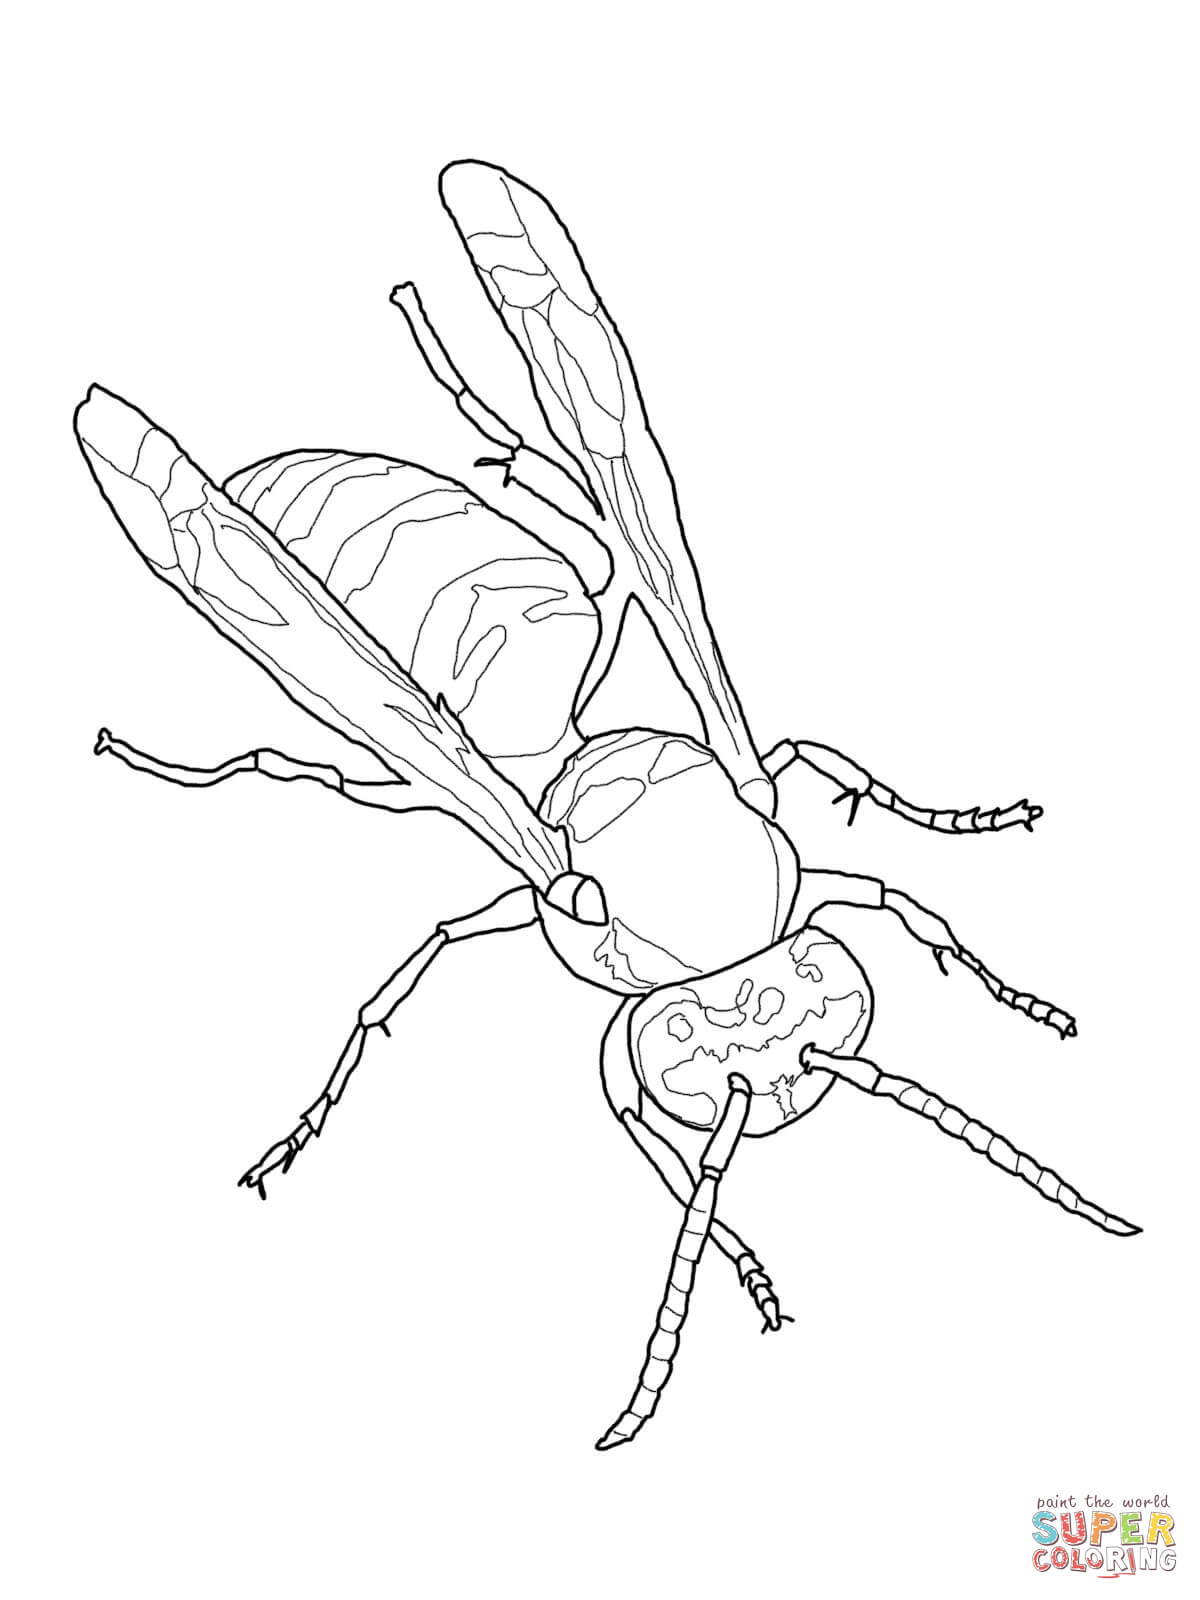 Eastern Yellow Jacket Coloring Page